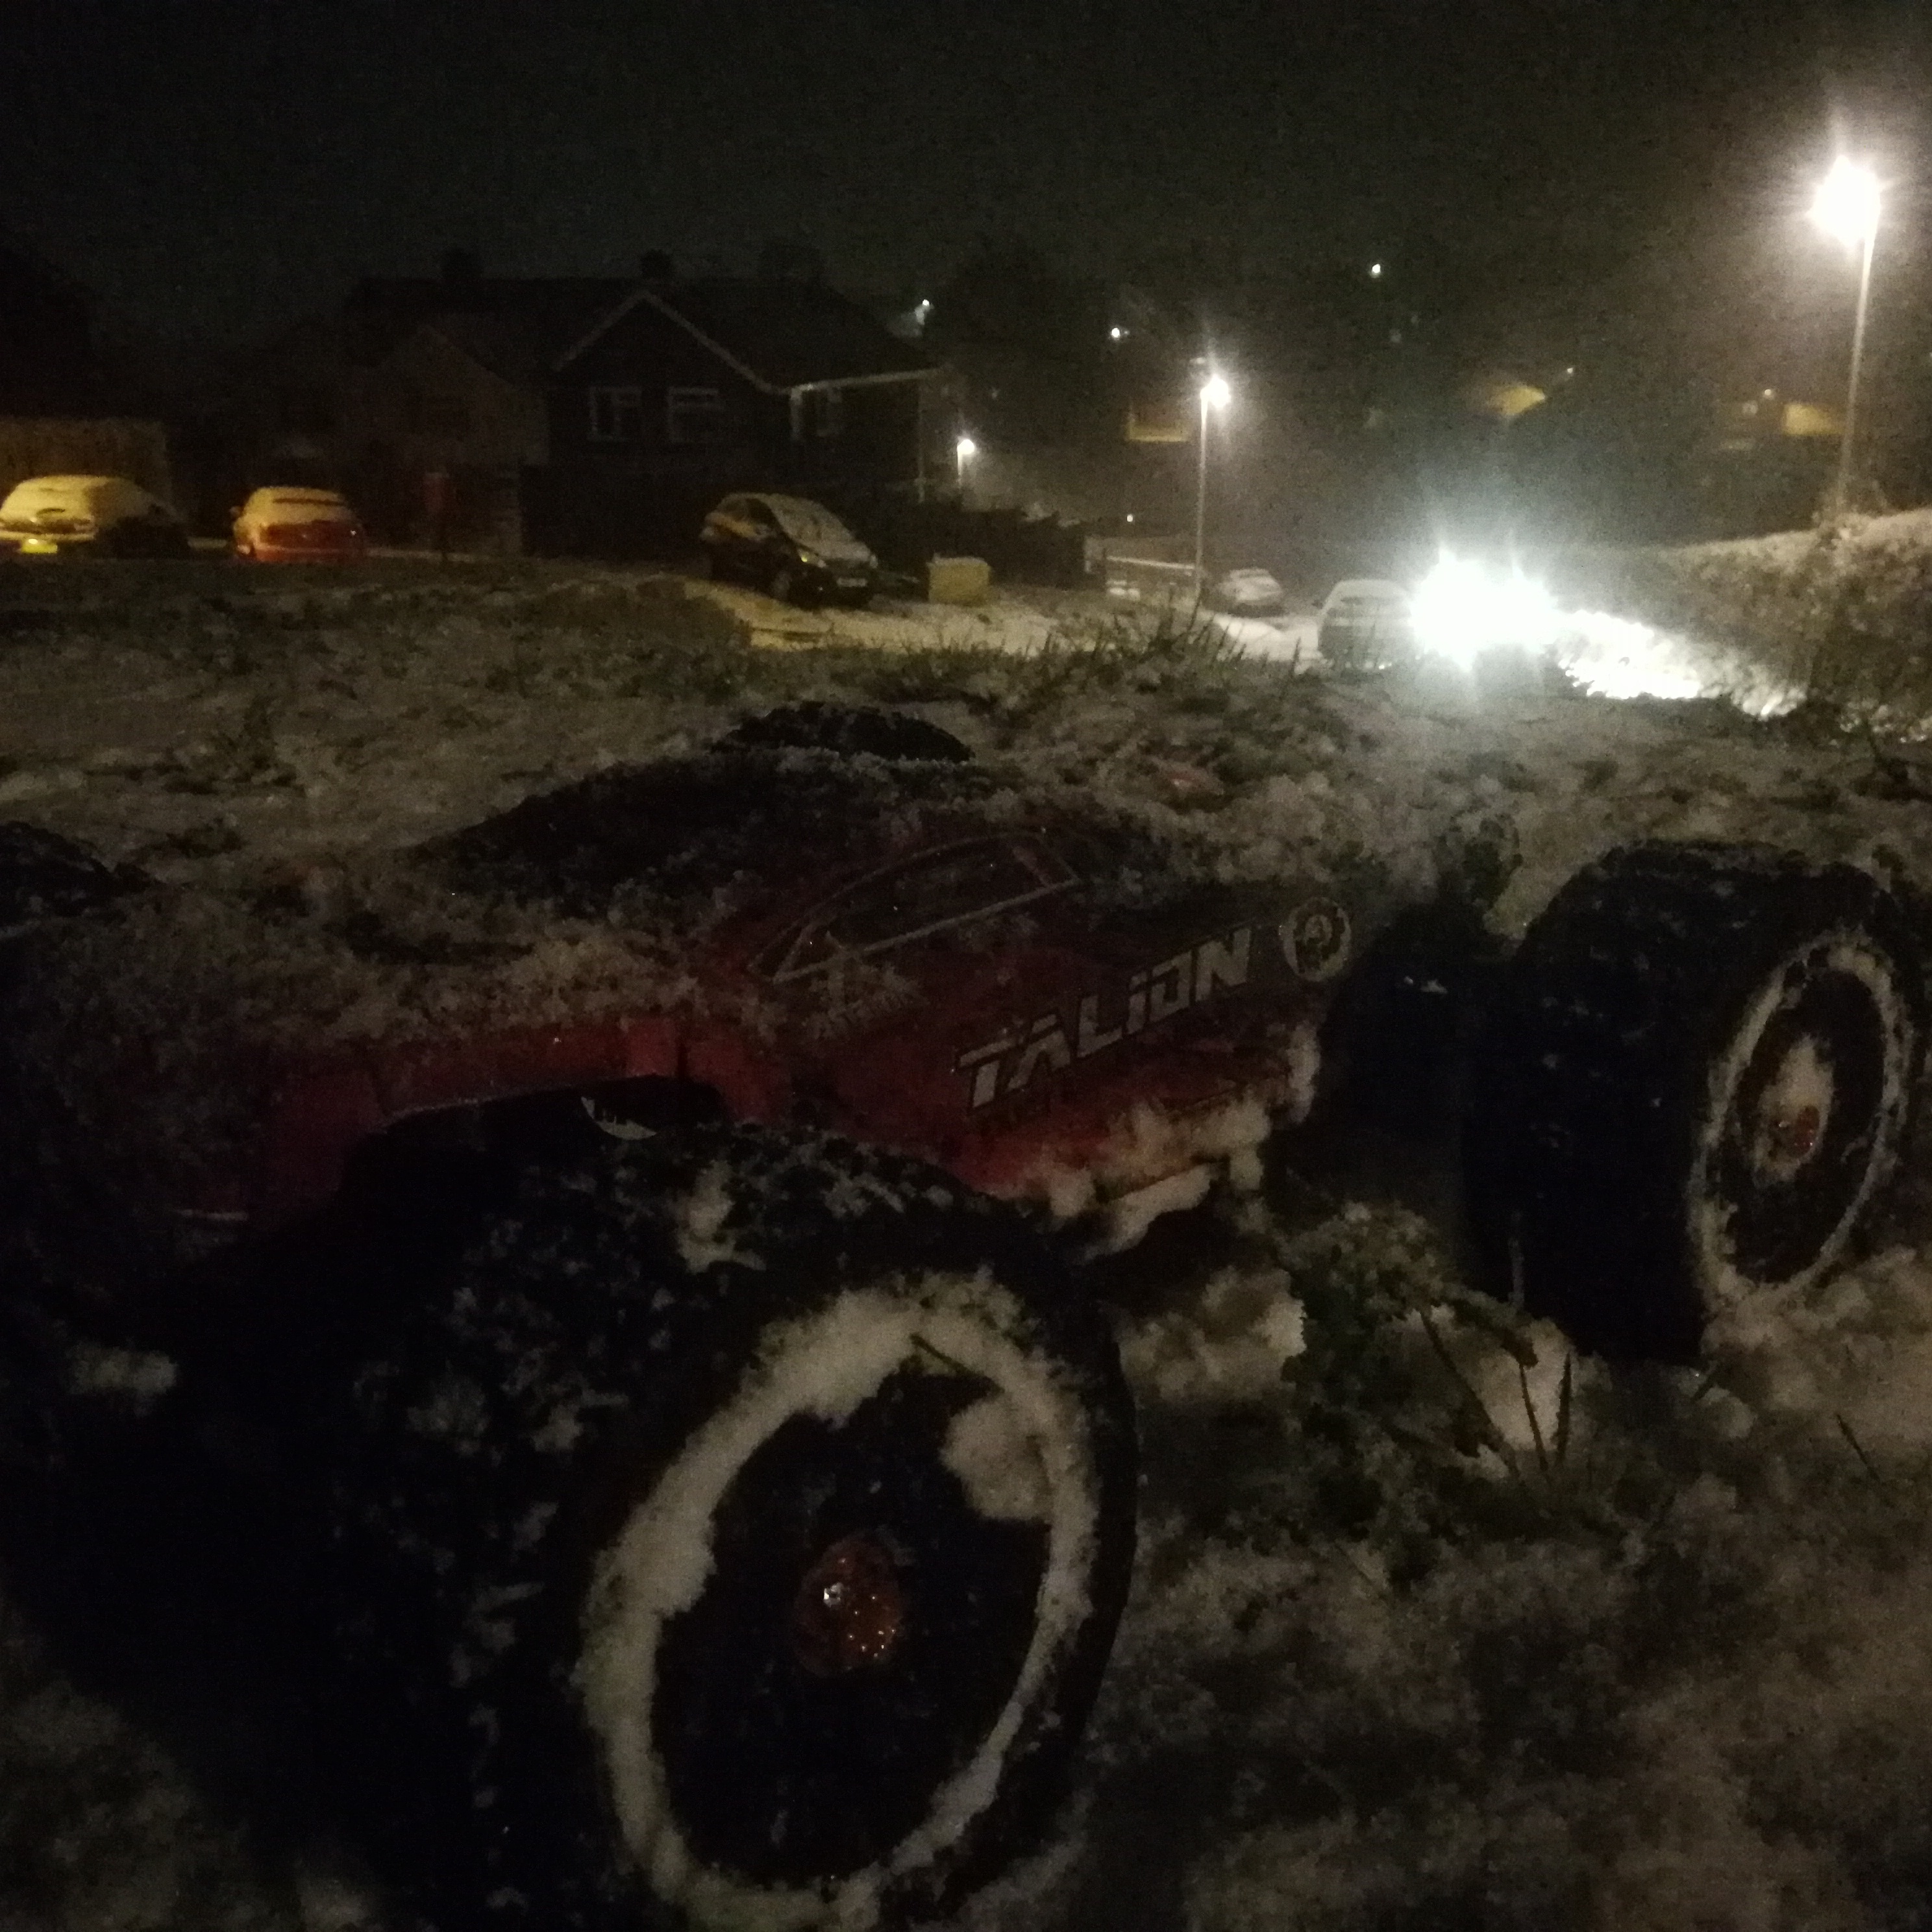 Night crawling in the snow